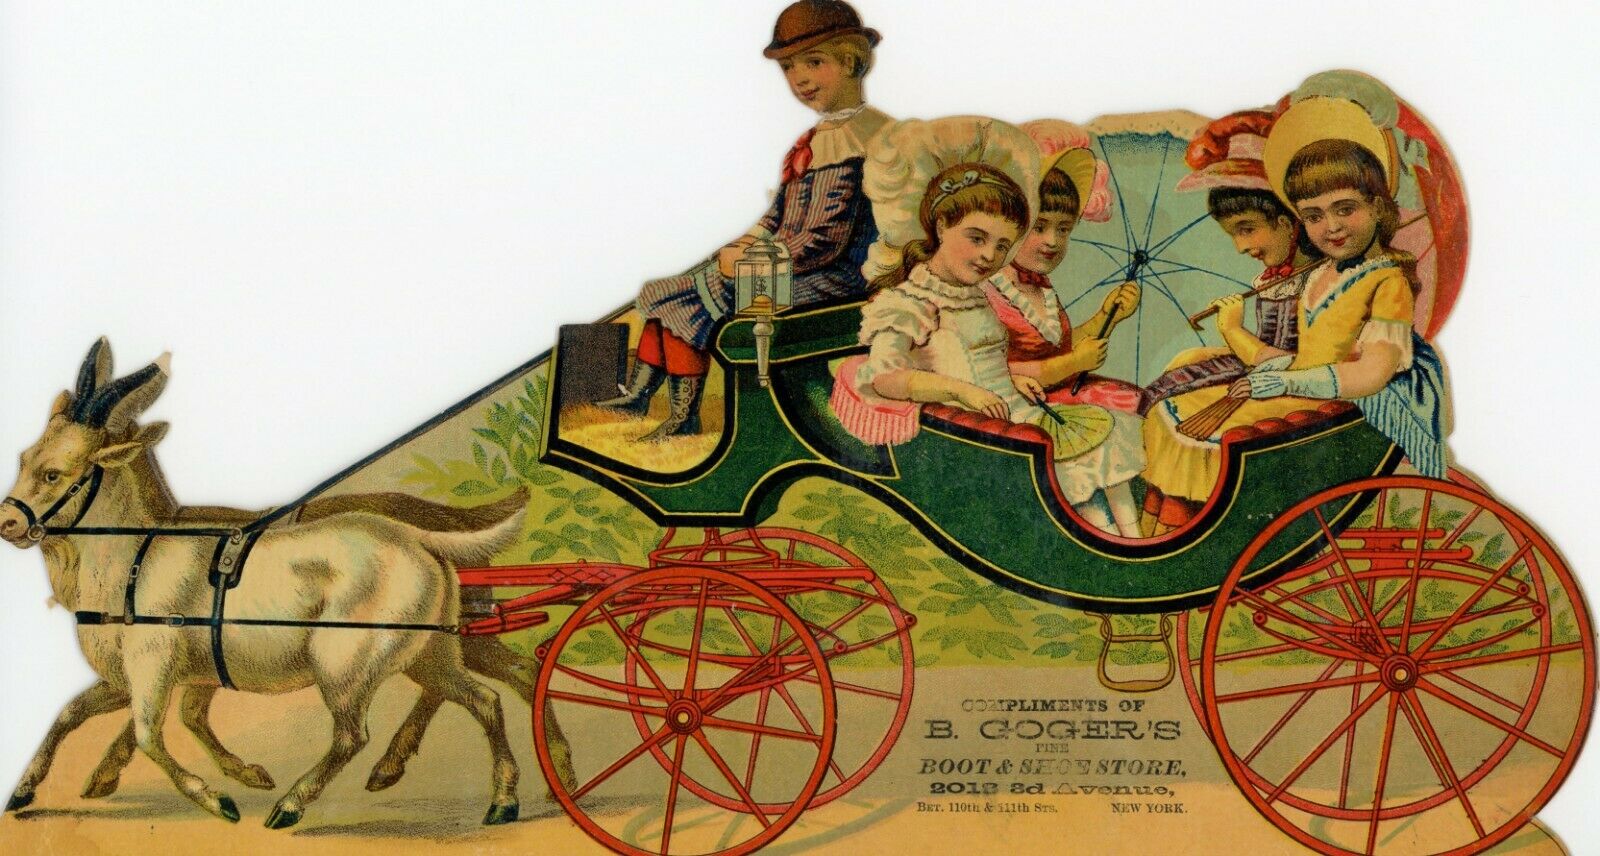 Vintage Die Cut Victorian Trade Card Boot & Shoes Carriage 2012 3rd Ave New York